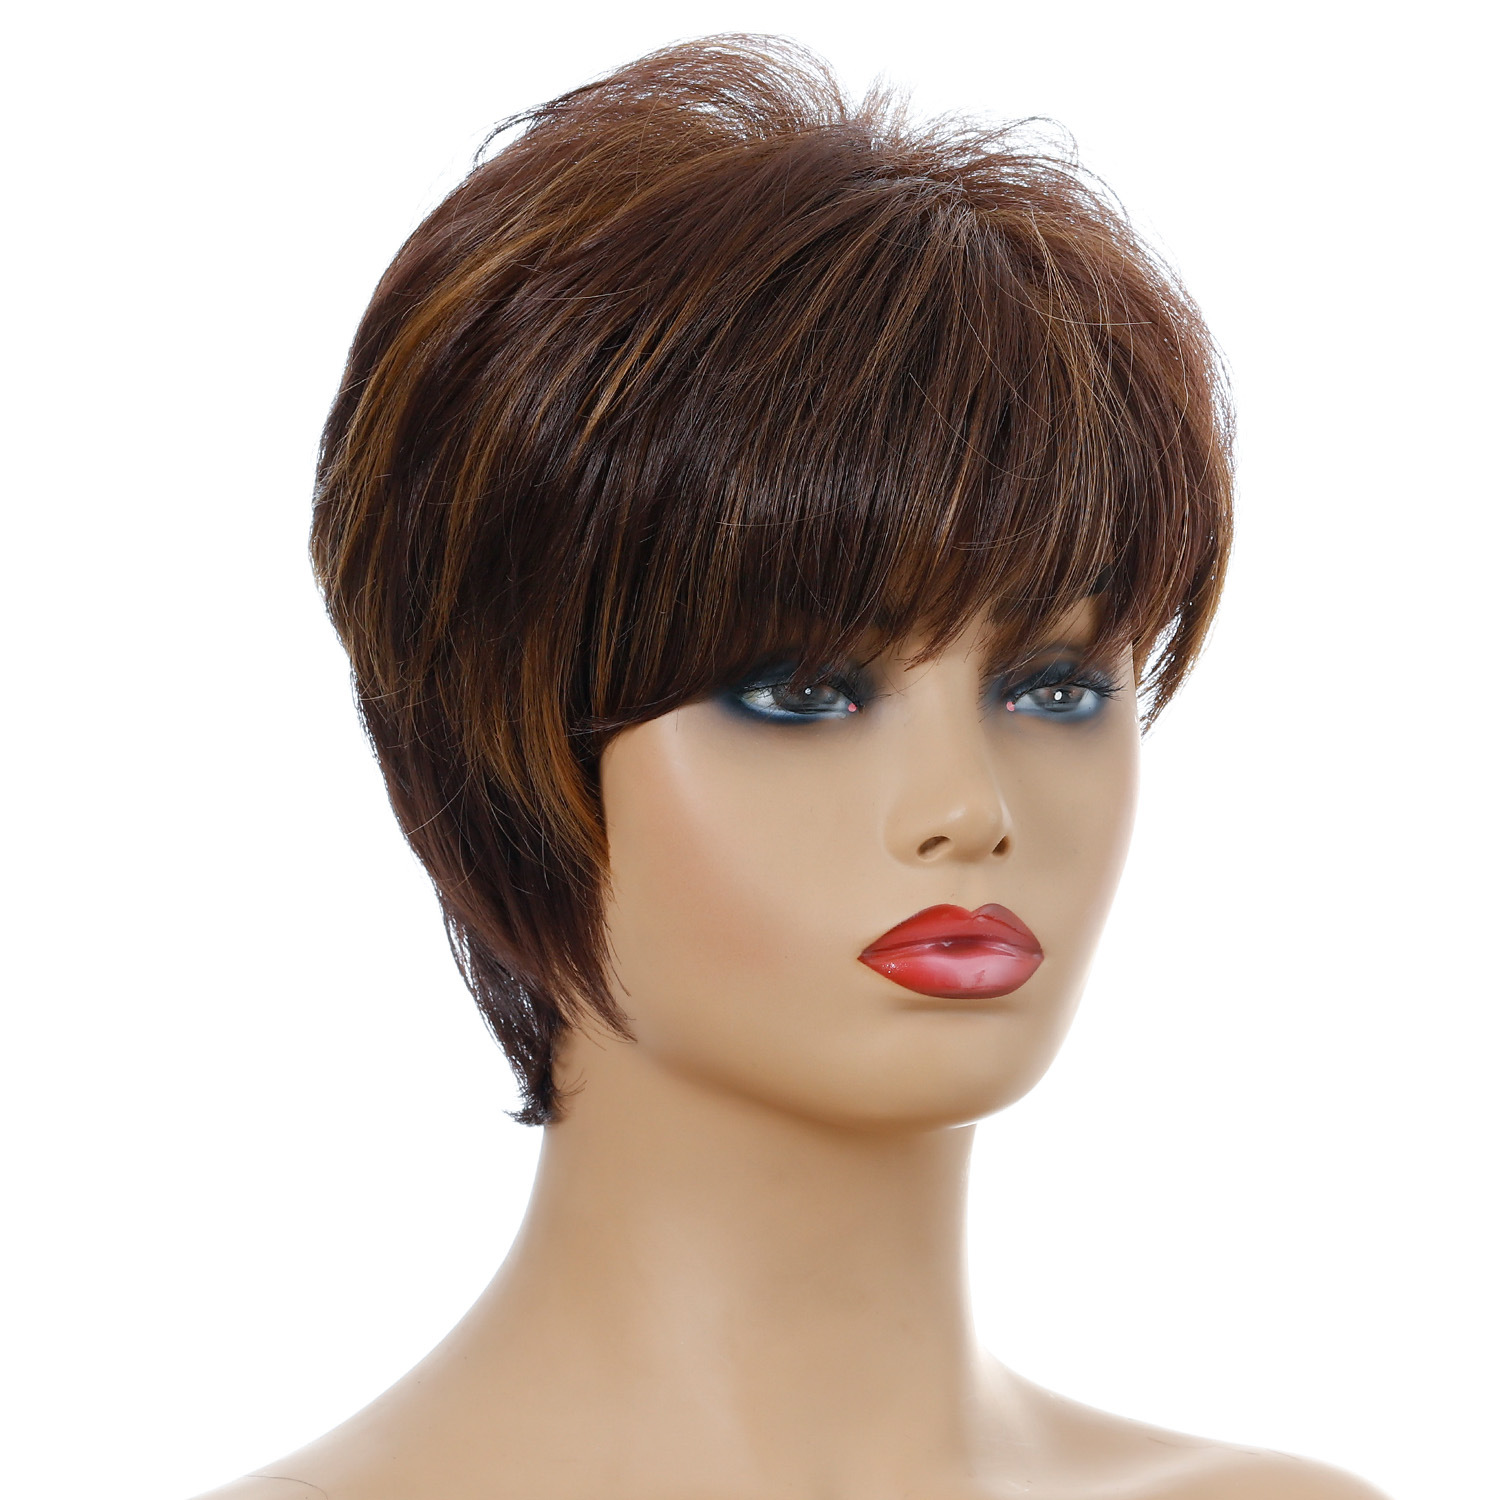 A fashionable wig in light brown, designed as small curly wigs for women with short curly hair